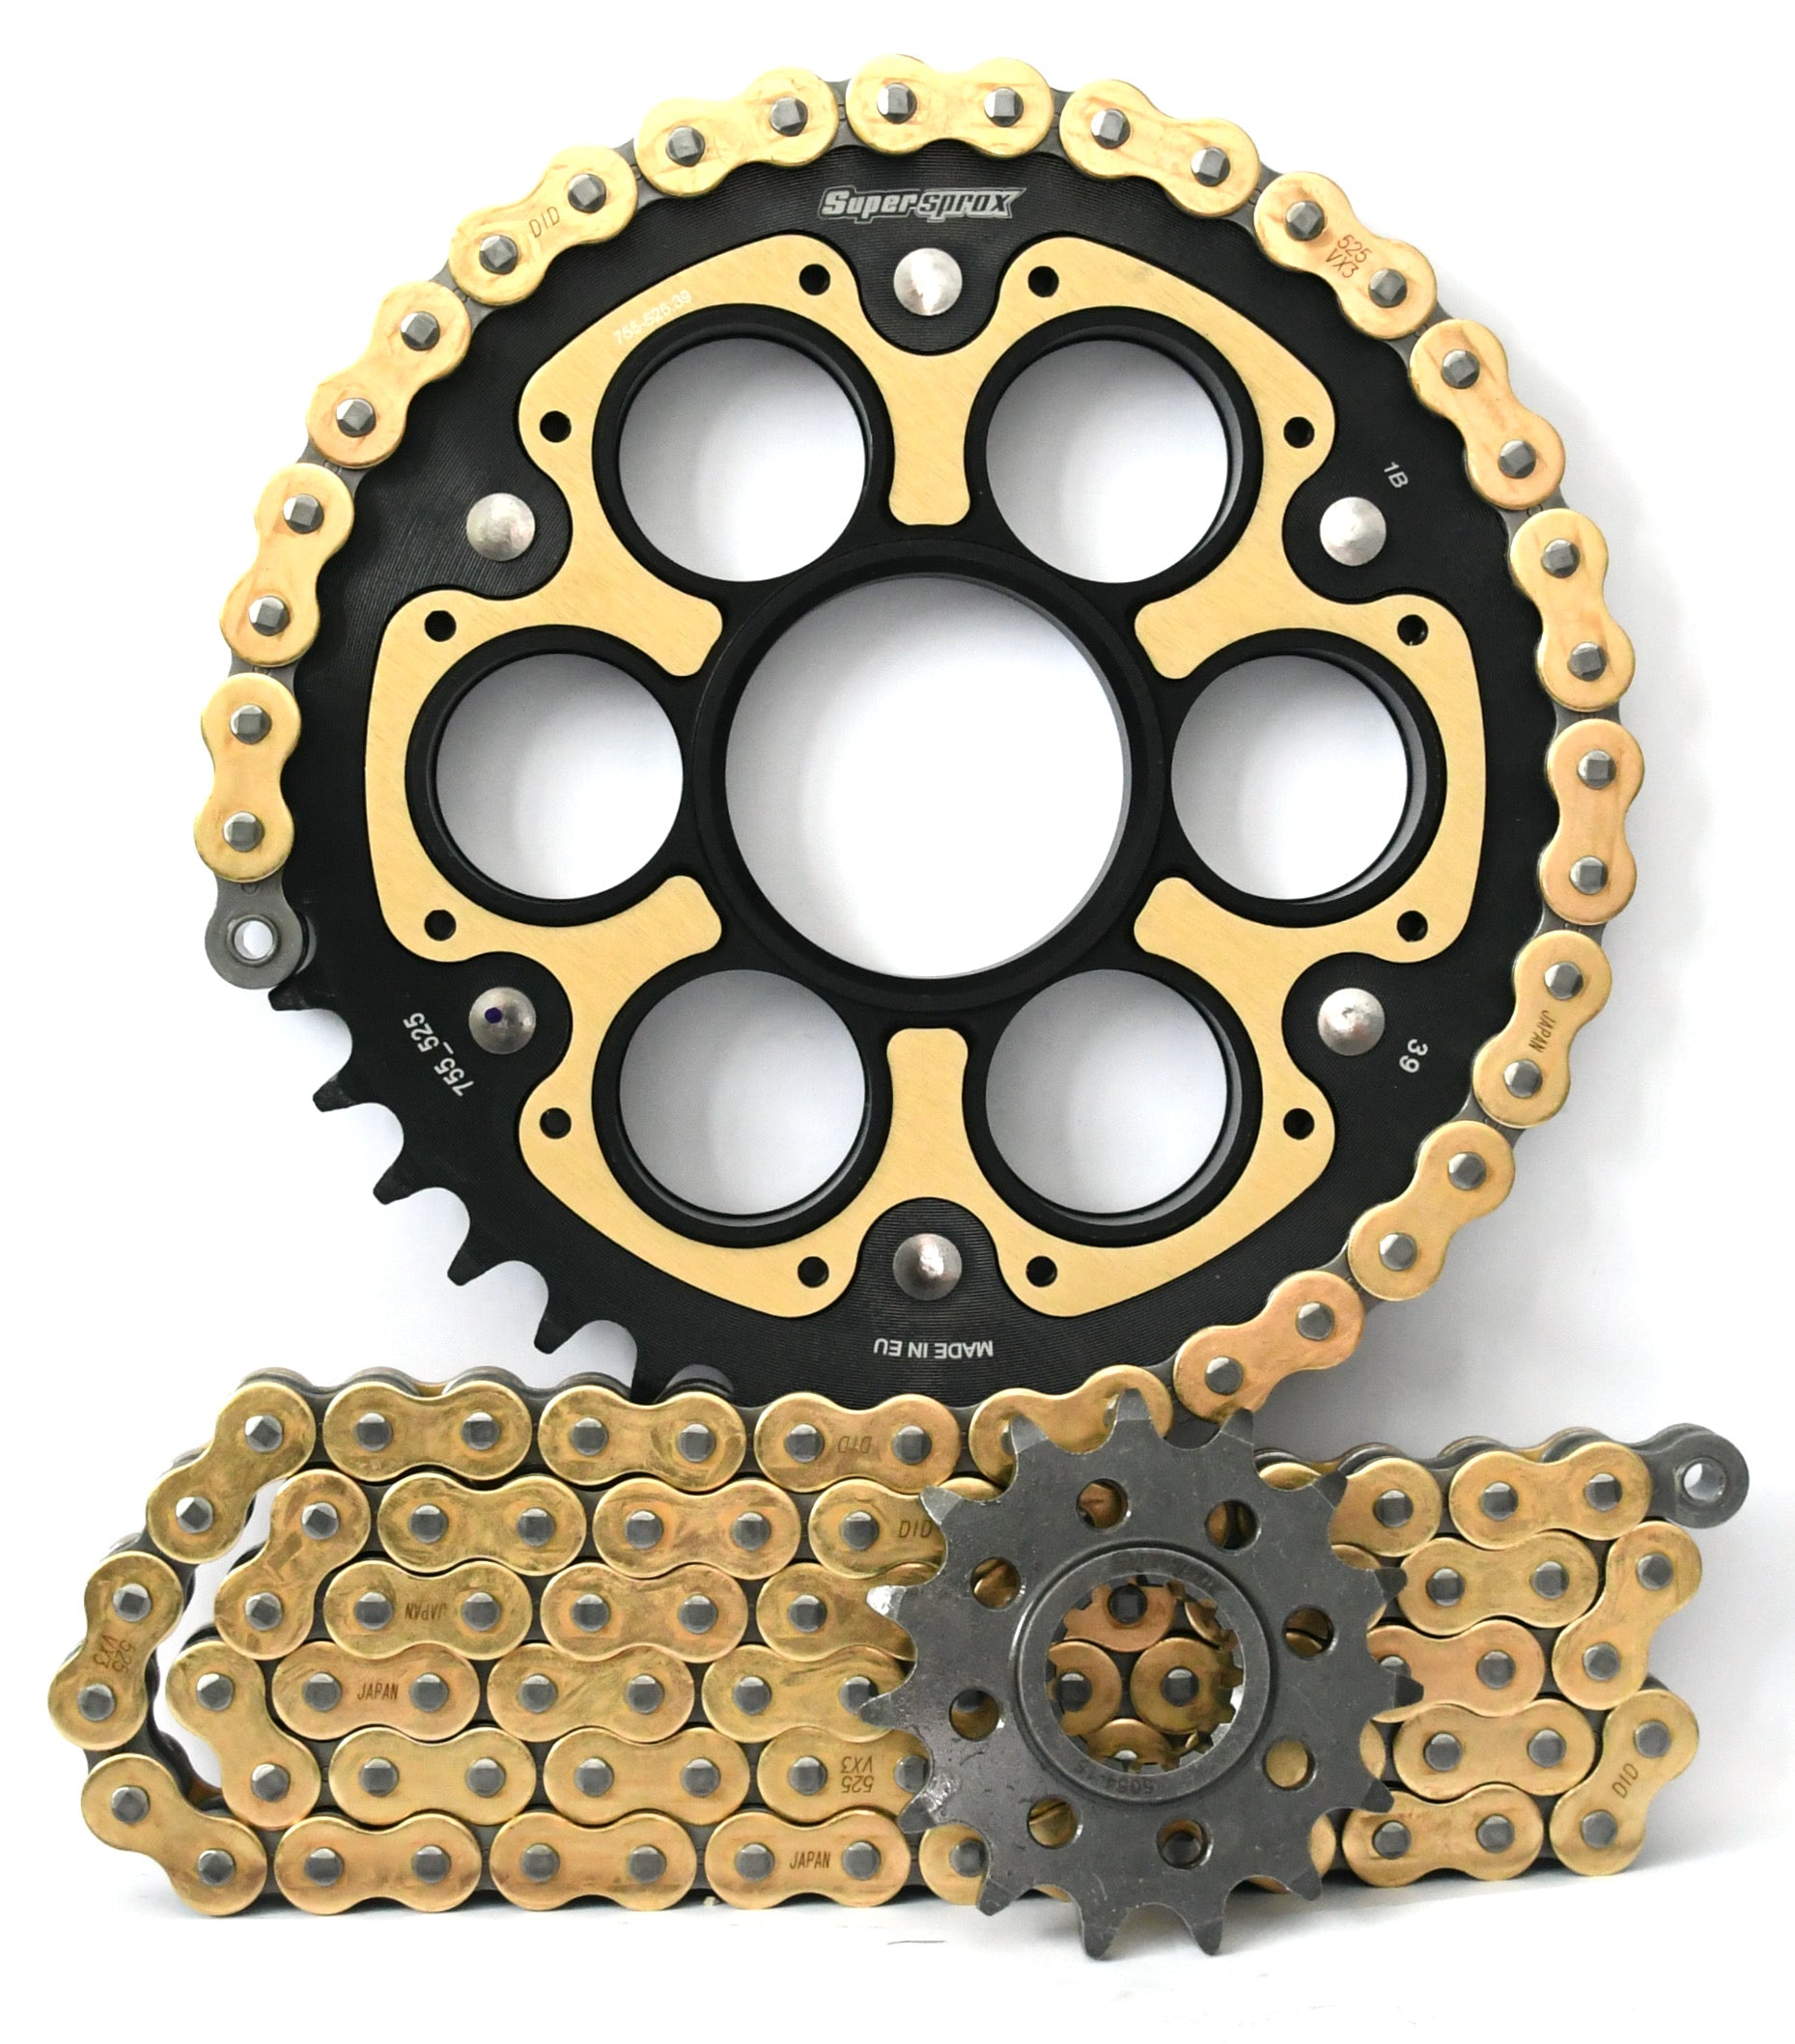 Supersprox Chain & Sprocket Kit for Ducati Panigale V4 and V4S - Standard Gearing - 0